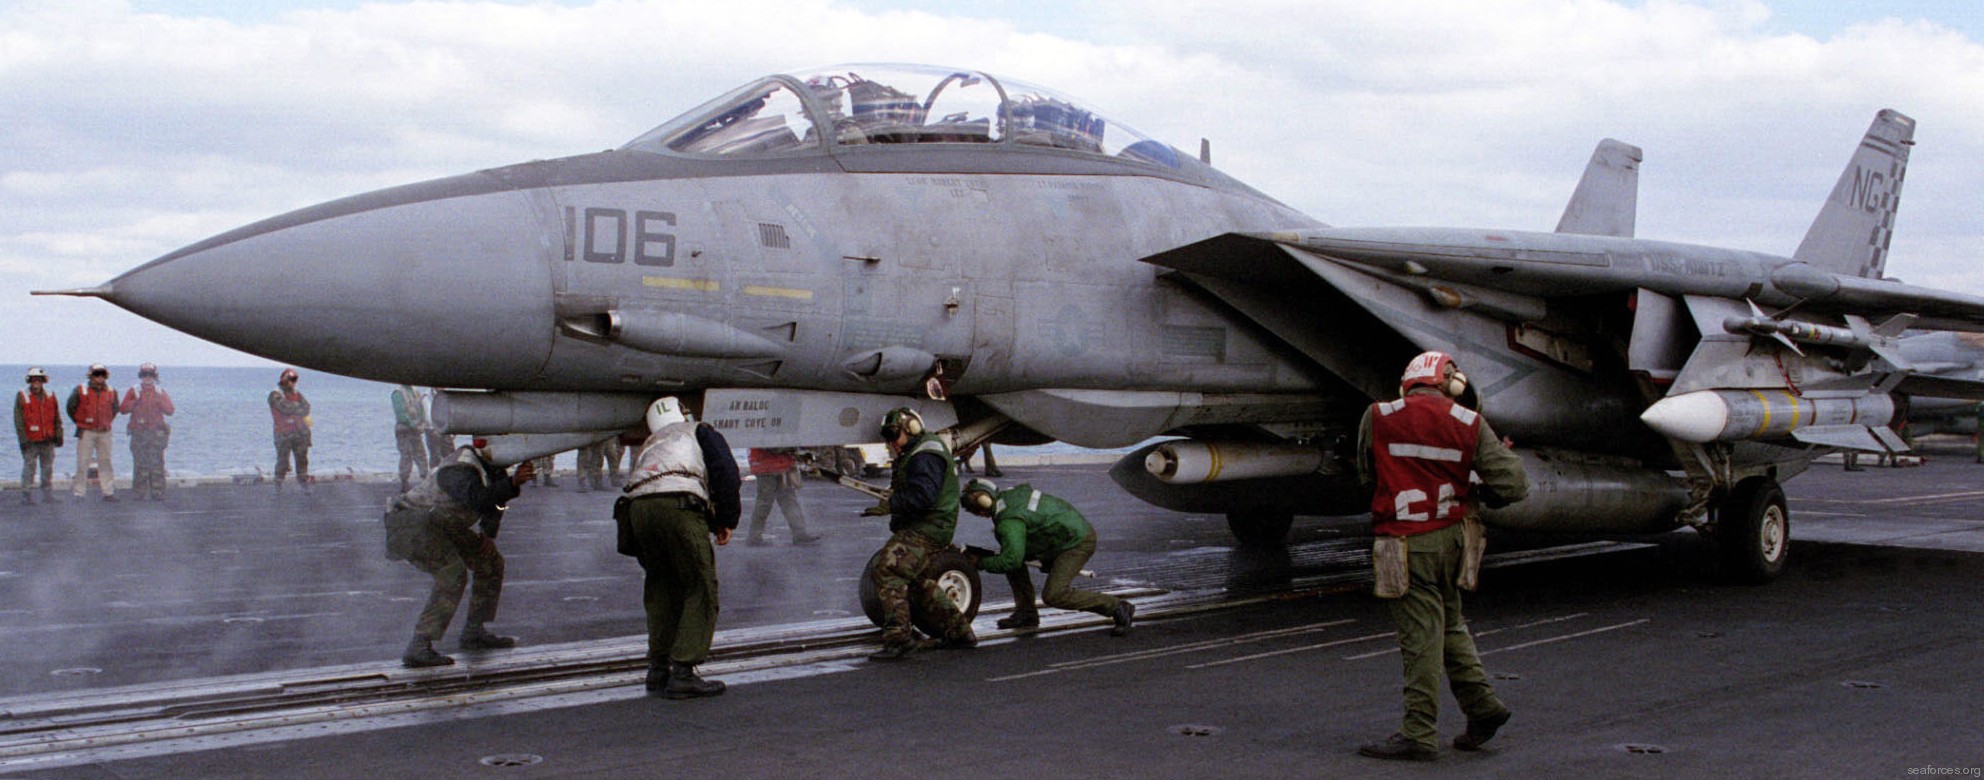 vf-211 fighting checkmates fighter squadron f-14a tomcat us navy carrier air wing cvw-9 uss nimitz cvn-68 40